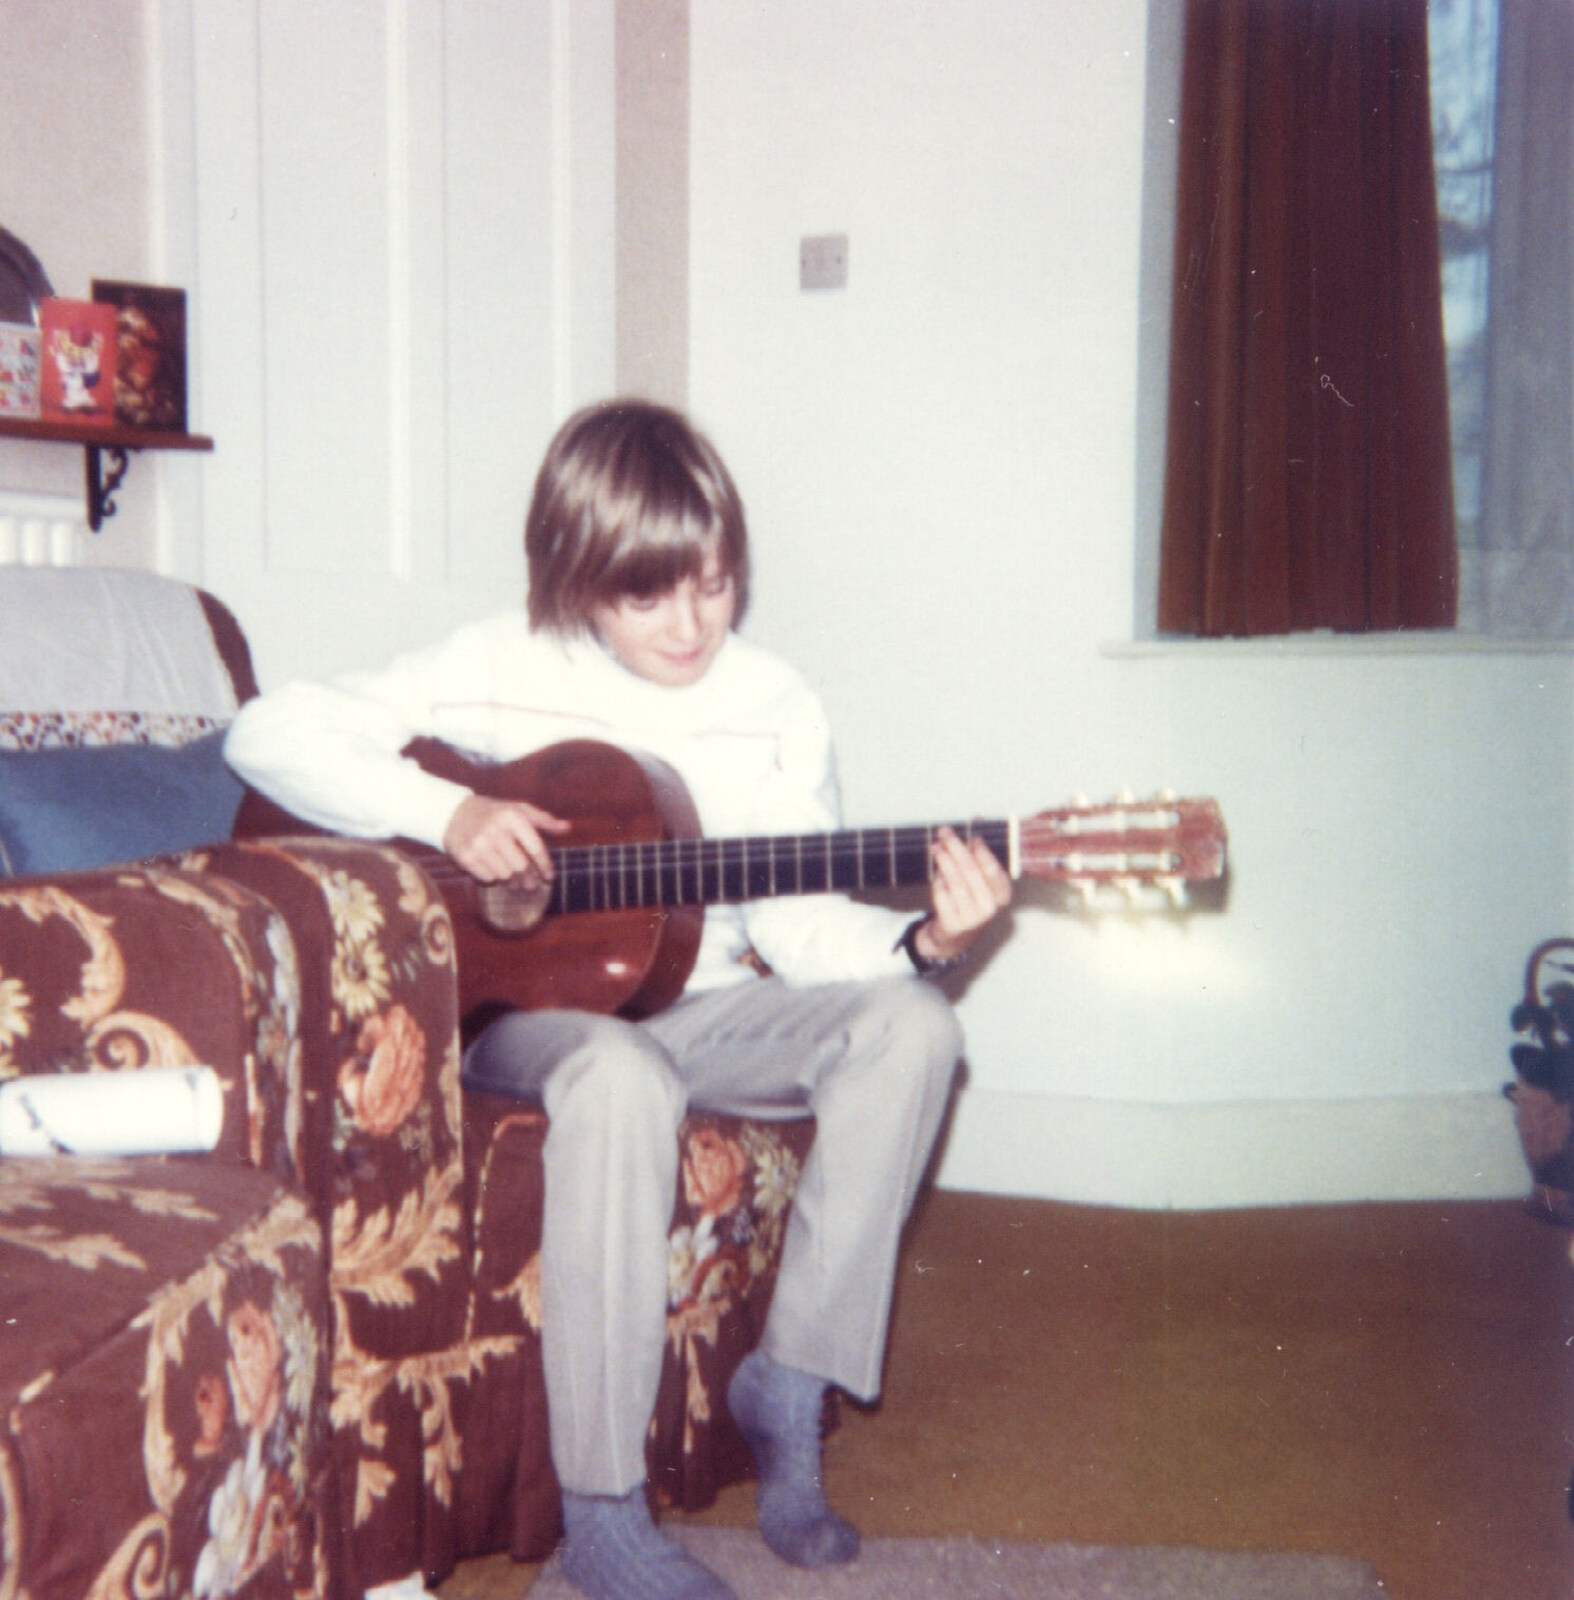 Family History: The 1980s - 24th January 2020: Nosher plays guitar at Danesbury Avenue